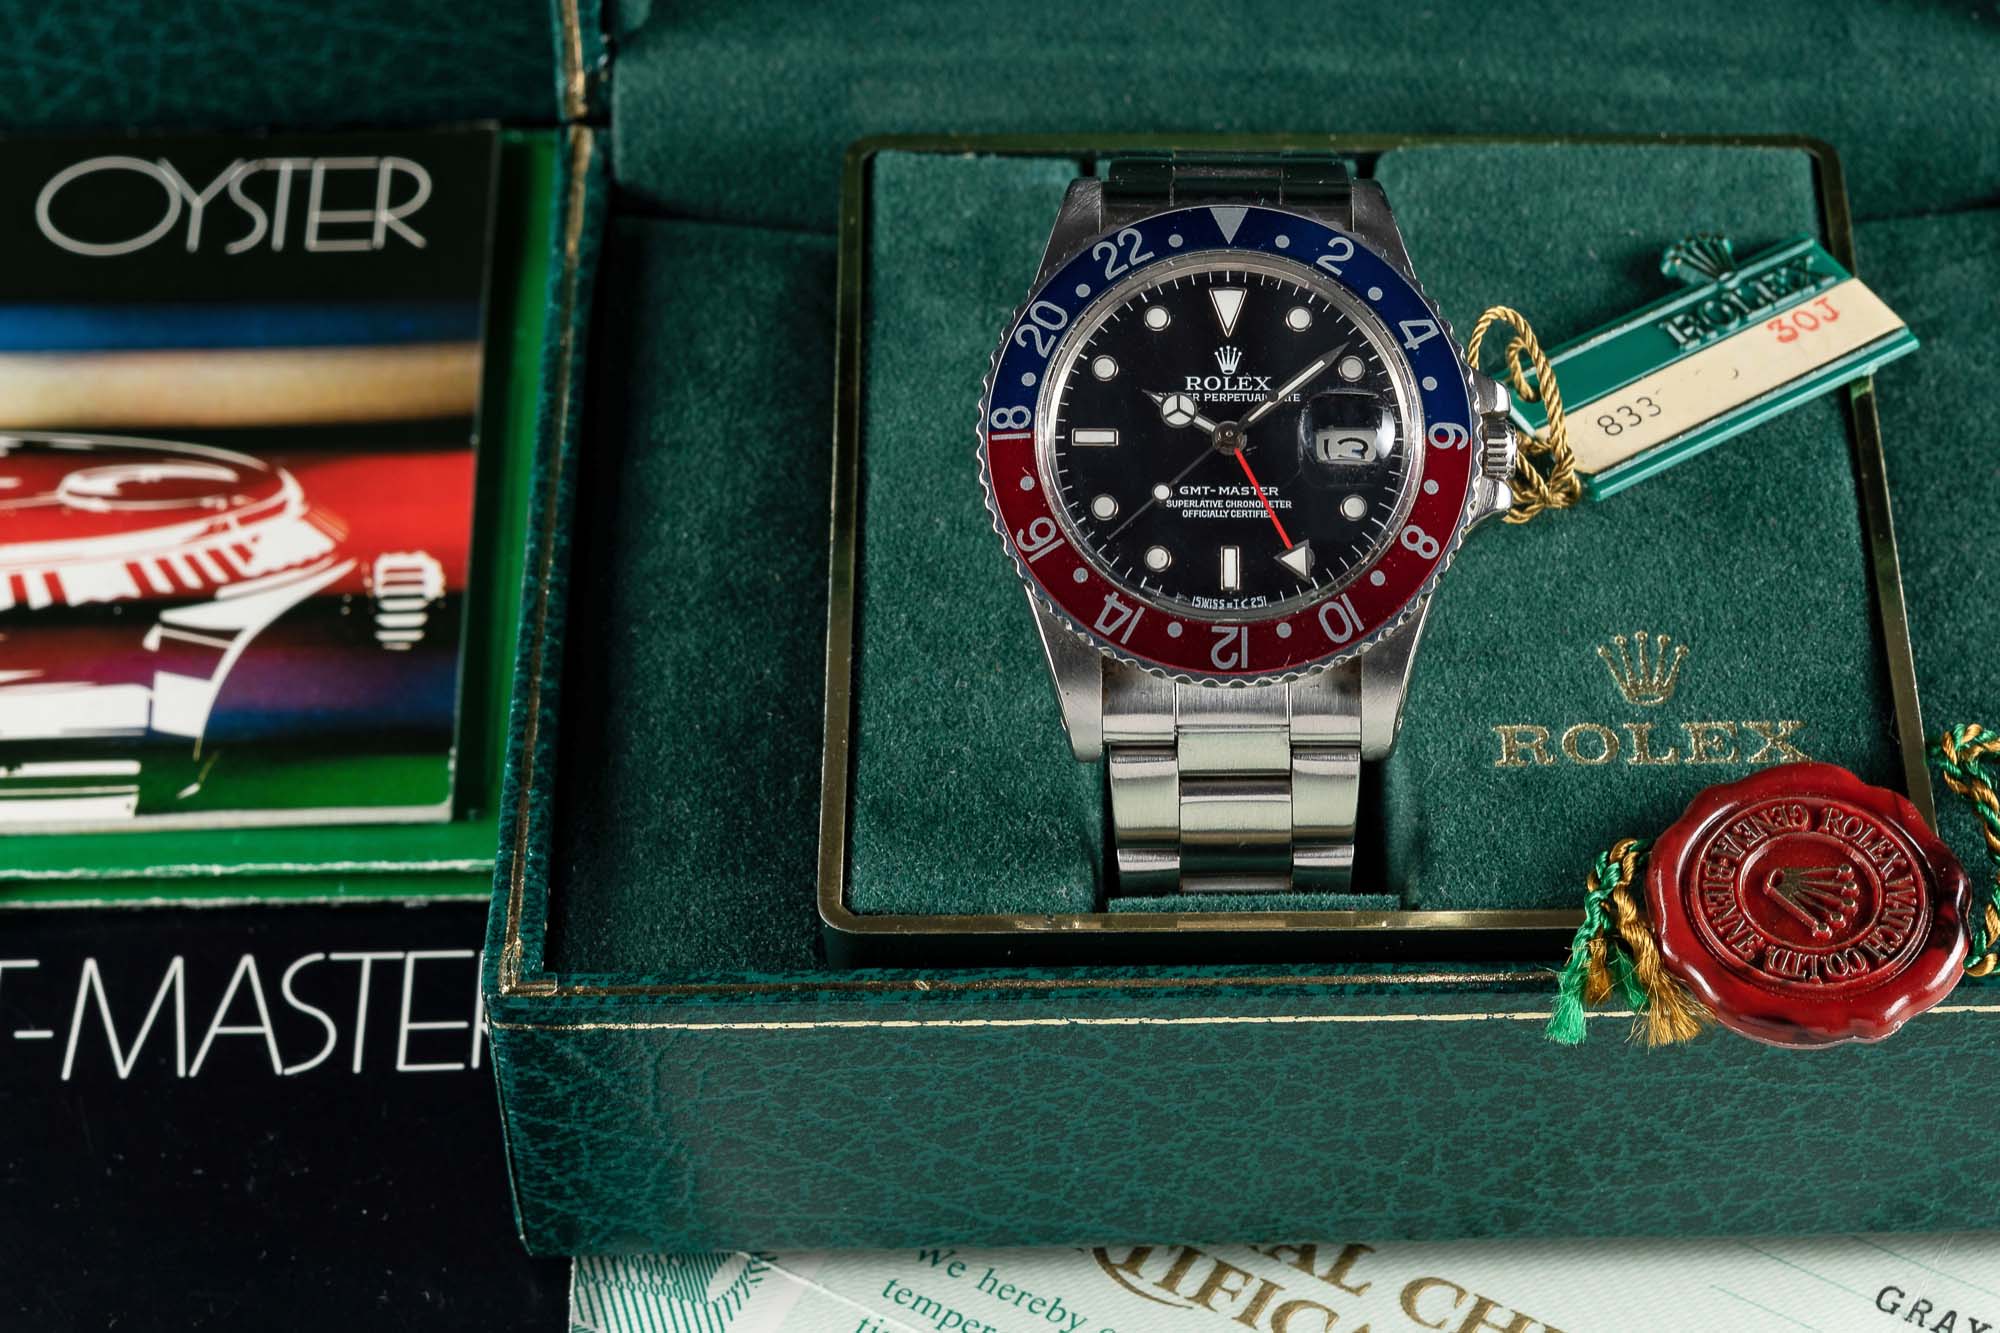 A RARE GENTLEMAN'S STAINLESS STEEL ROLEX OYSTER PERPETUAL DATE GMT MASTER "PEPSI" BRACELET WATCH